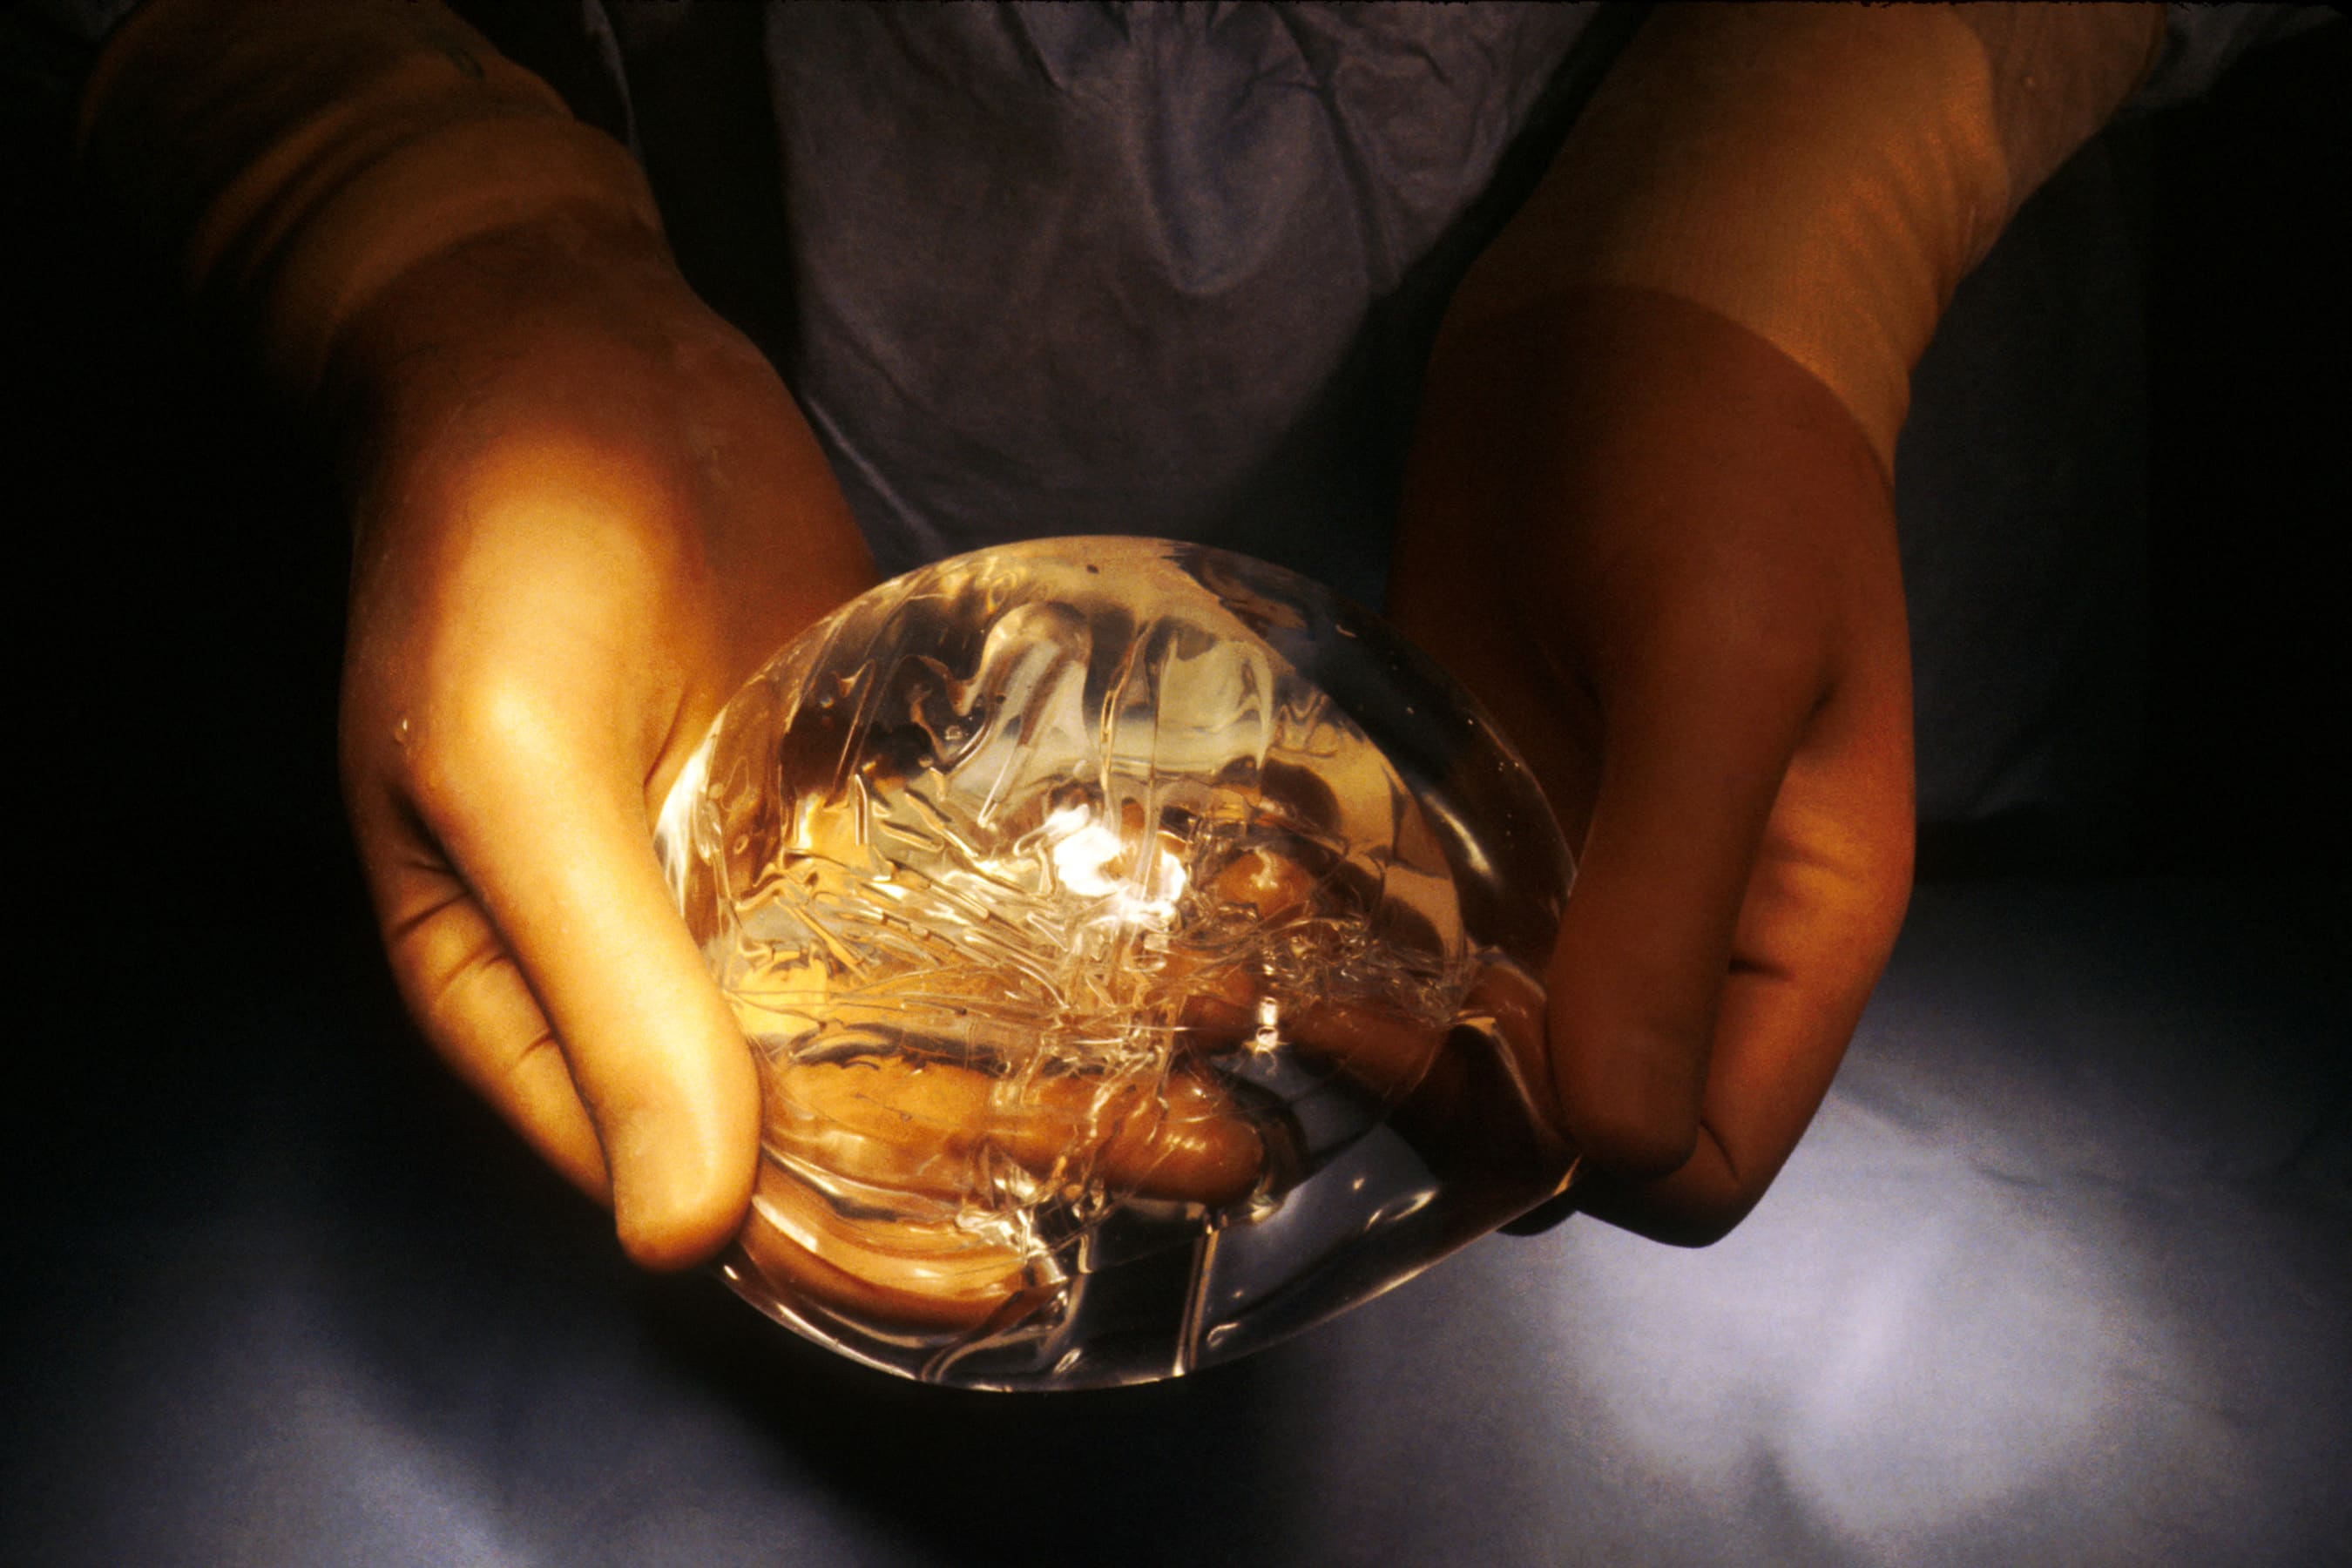 Dow Corning Breast Implant Lawsuits